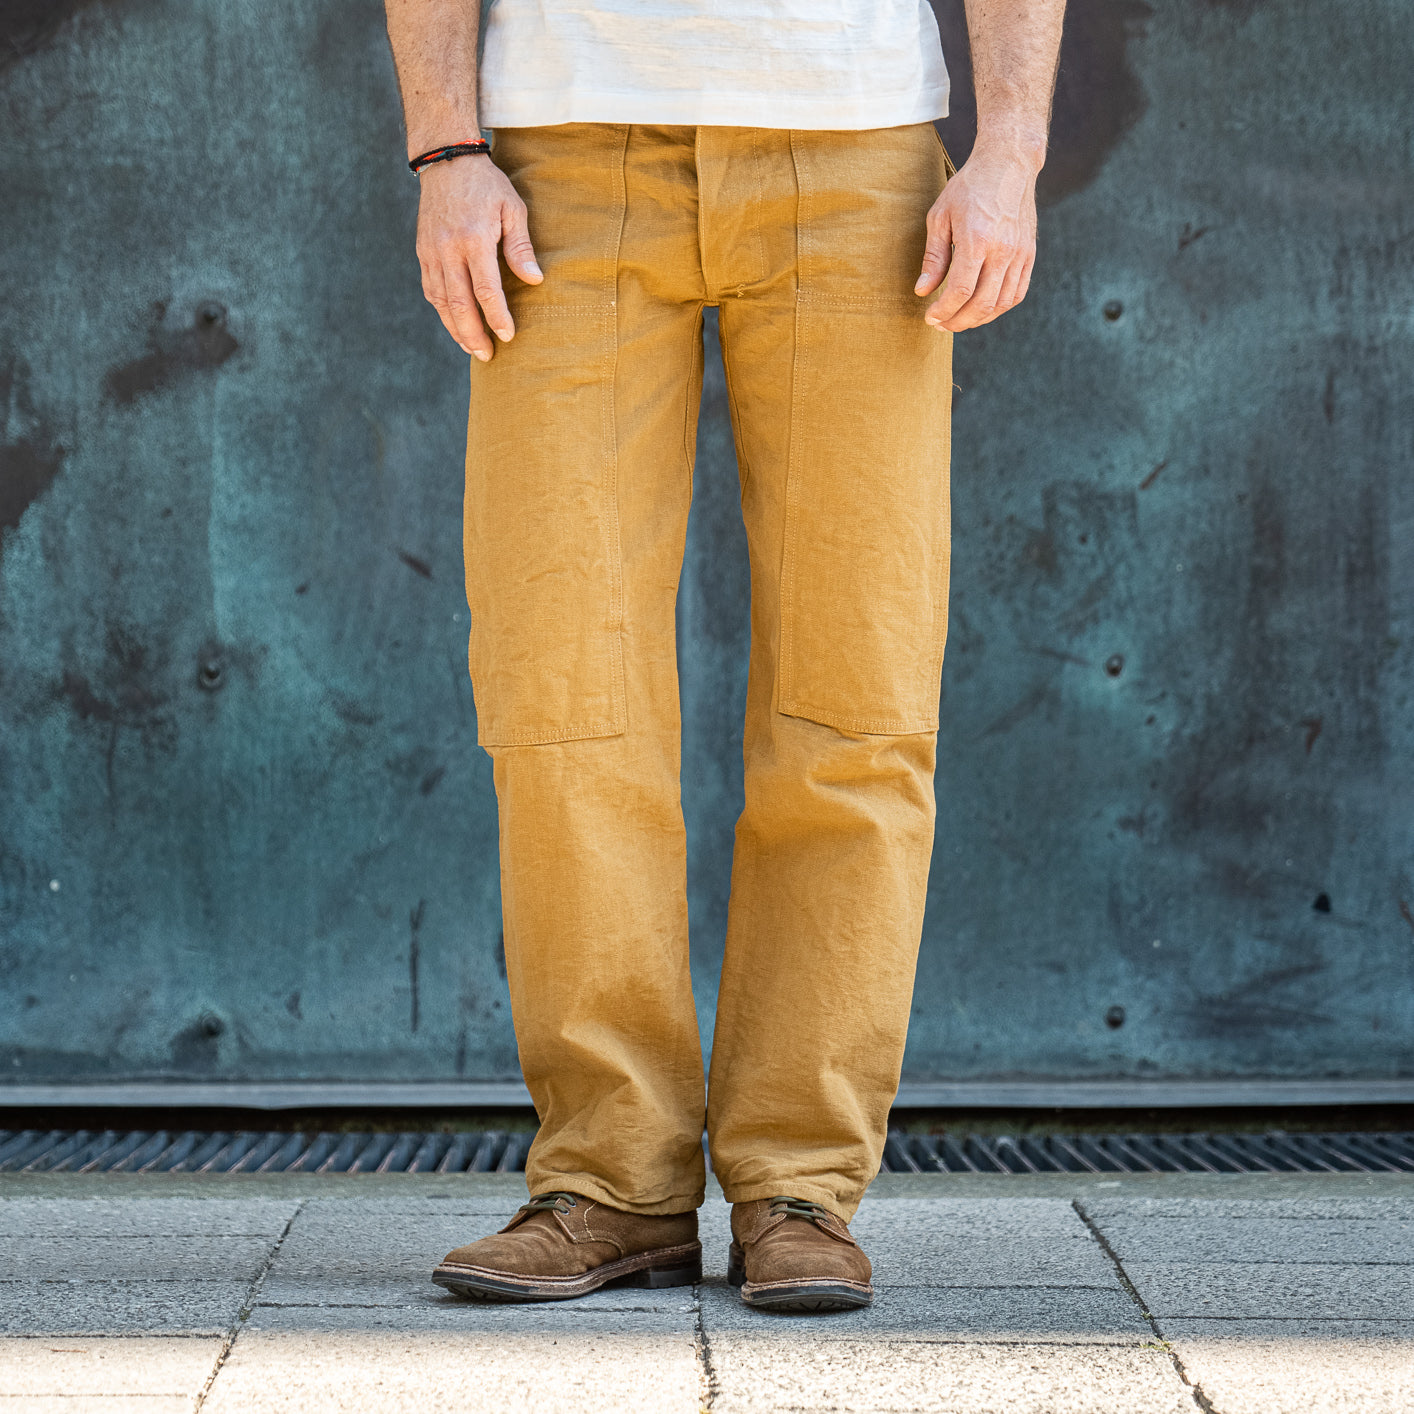 Norse Store | Shipping Worldwide - Carhartt Double Knee Pant - Blue Stone  Wash